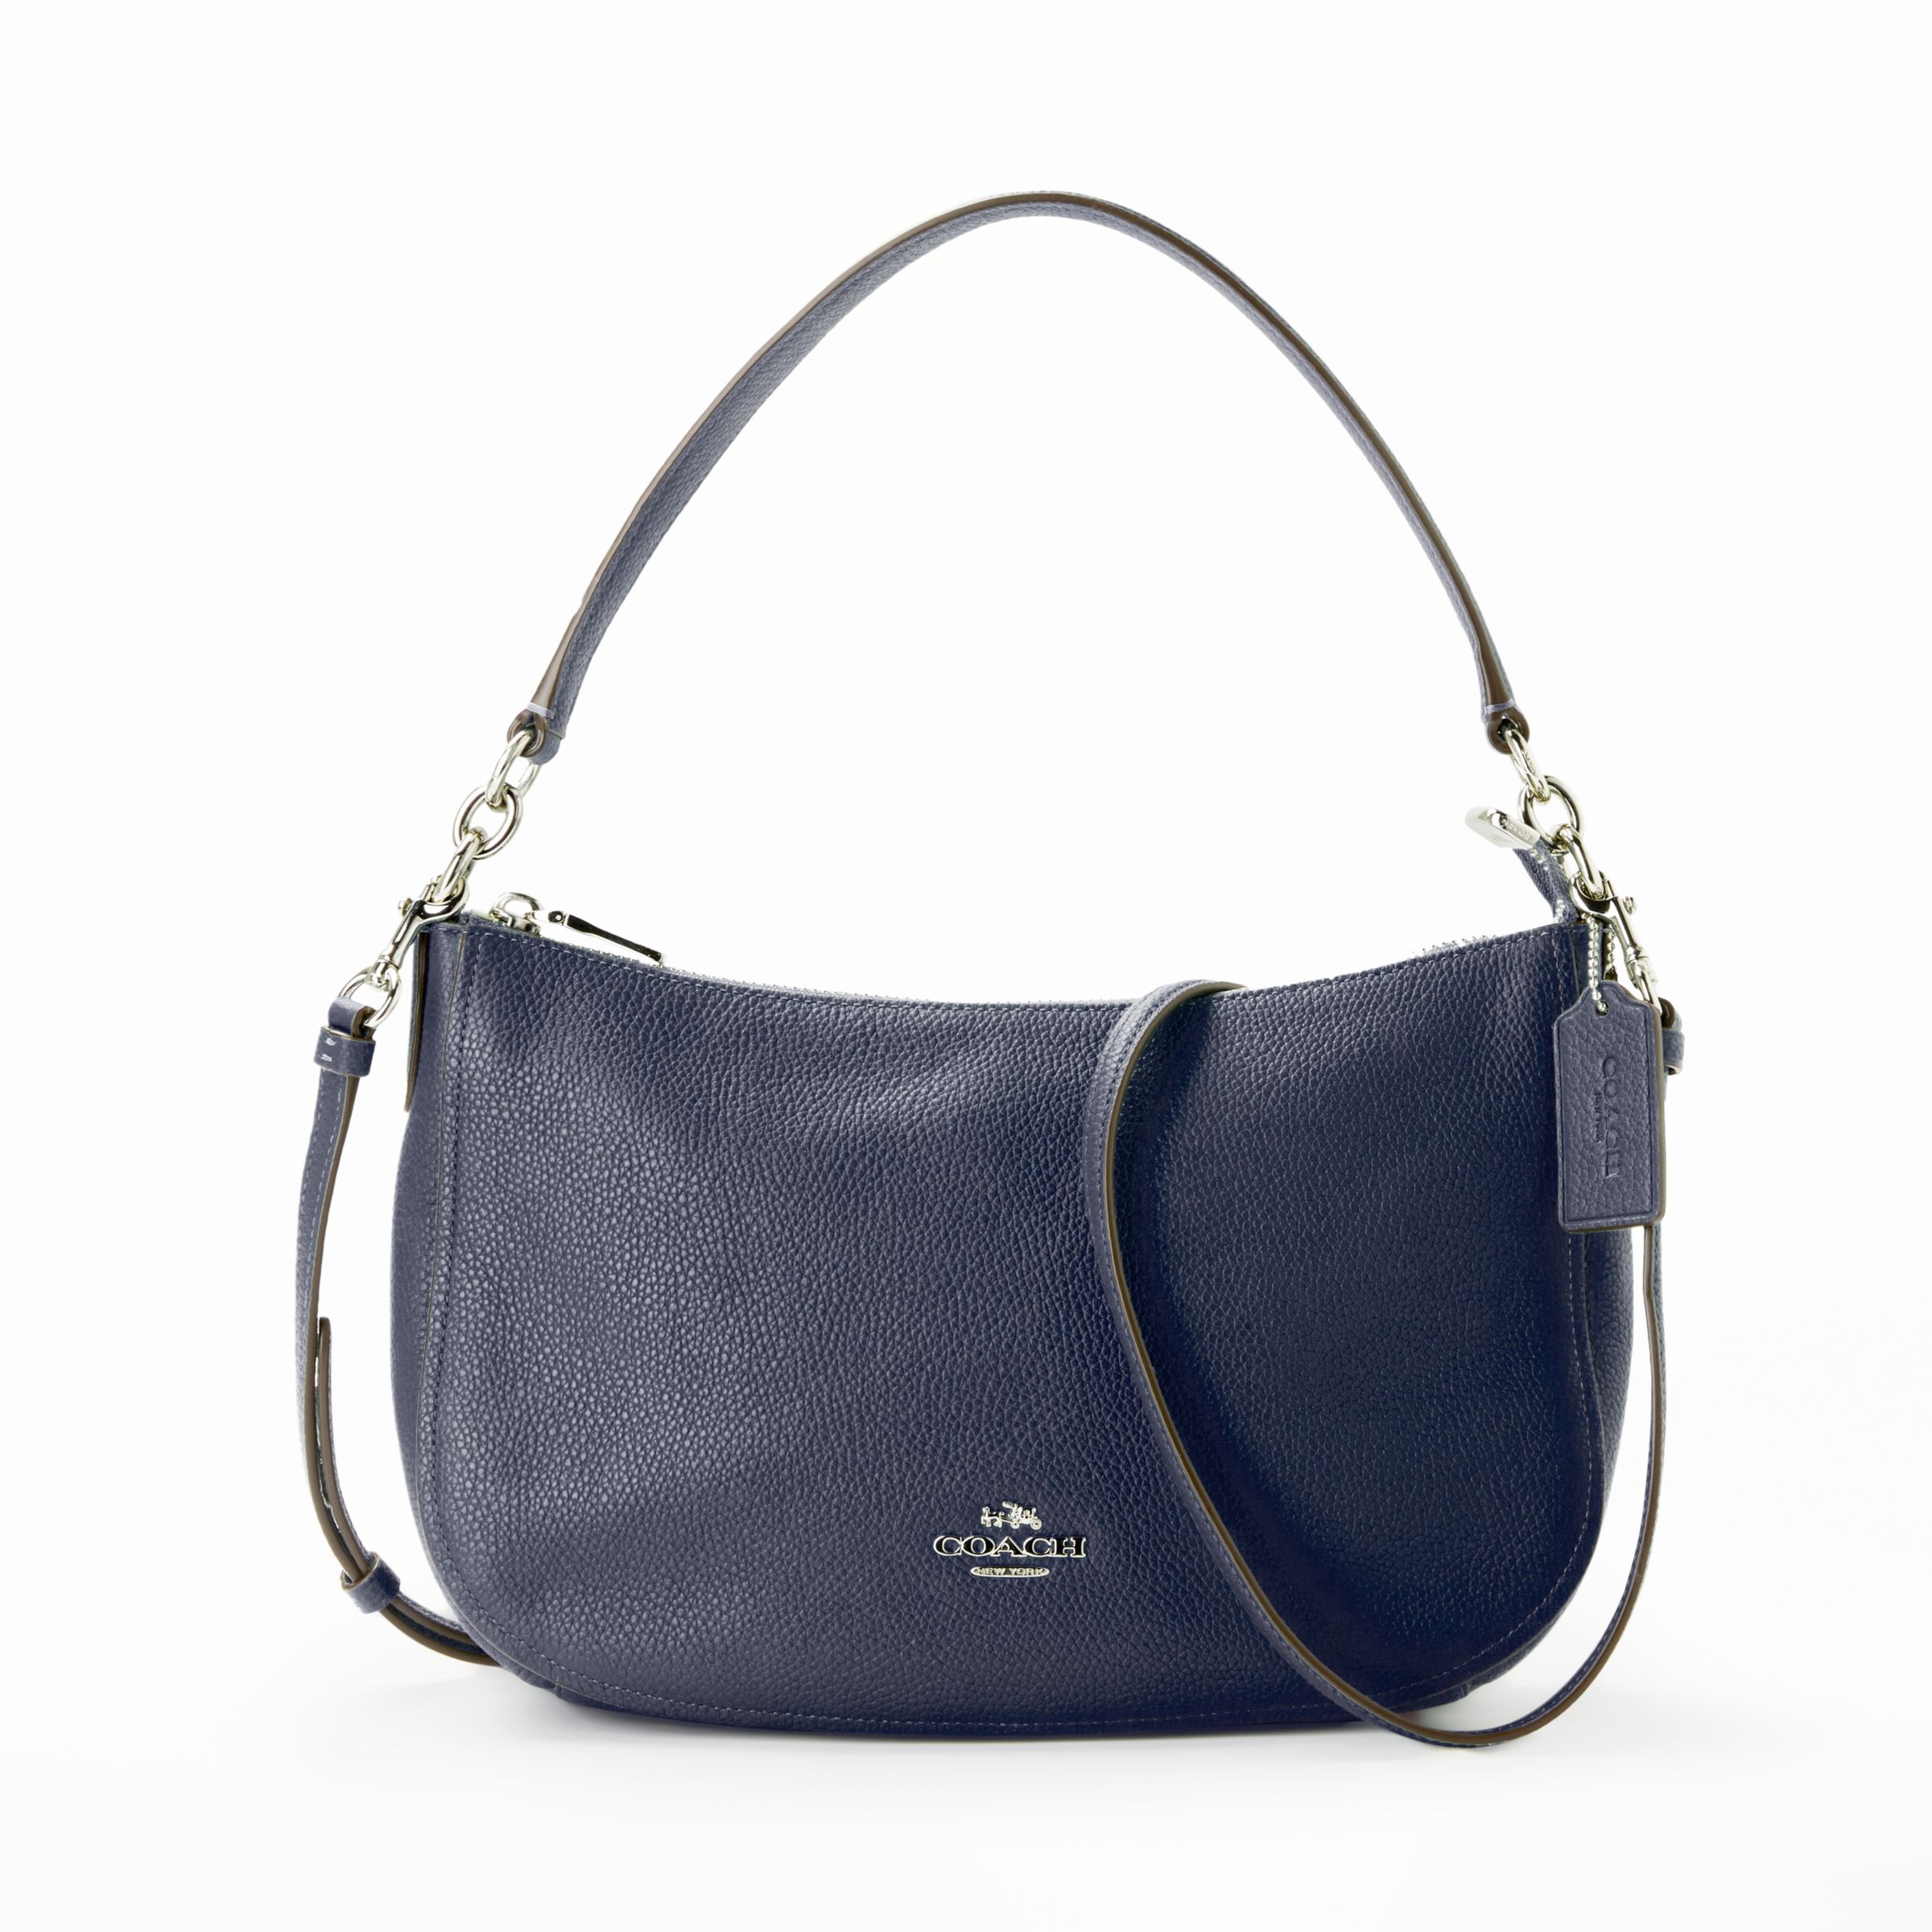 Coach Chelsea Polished Pebble Leather Cross Body Bag at John Lewis & Partners